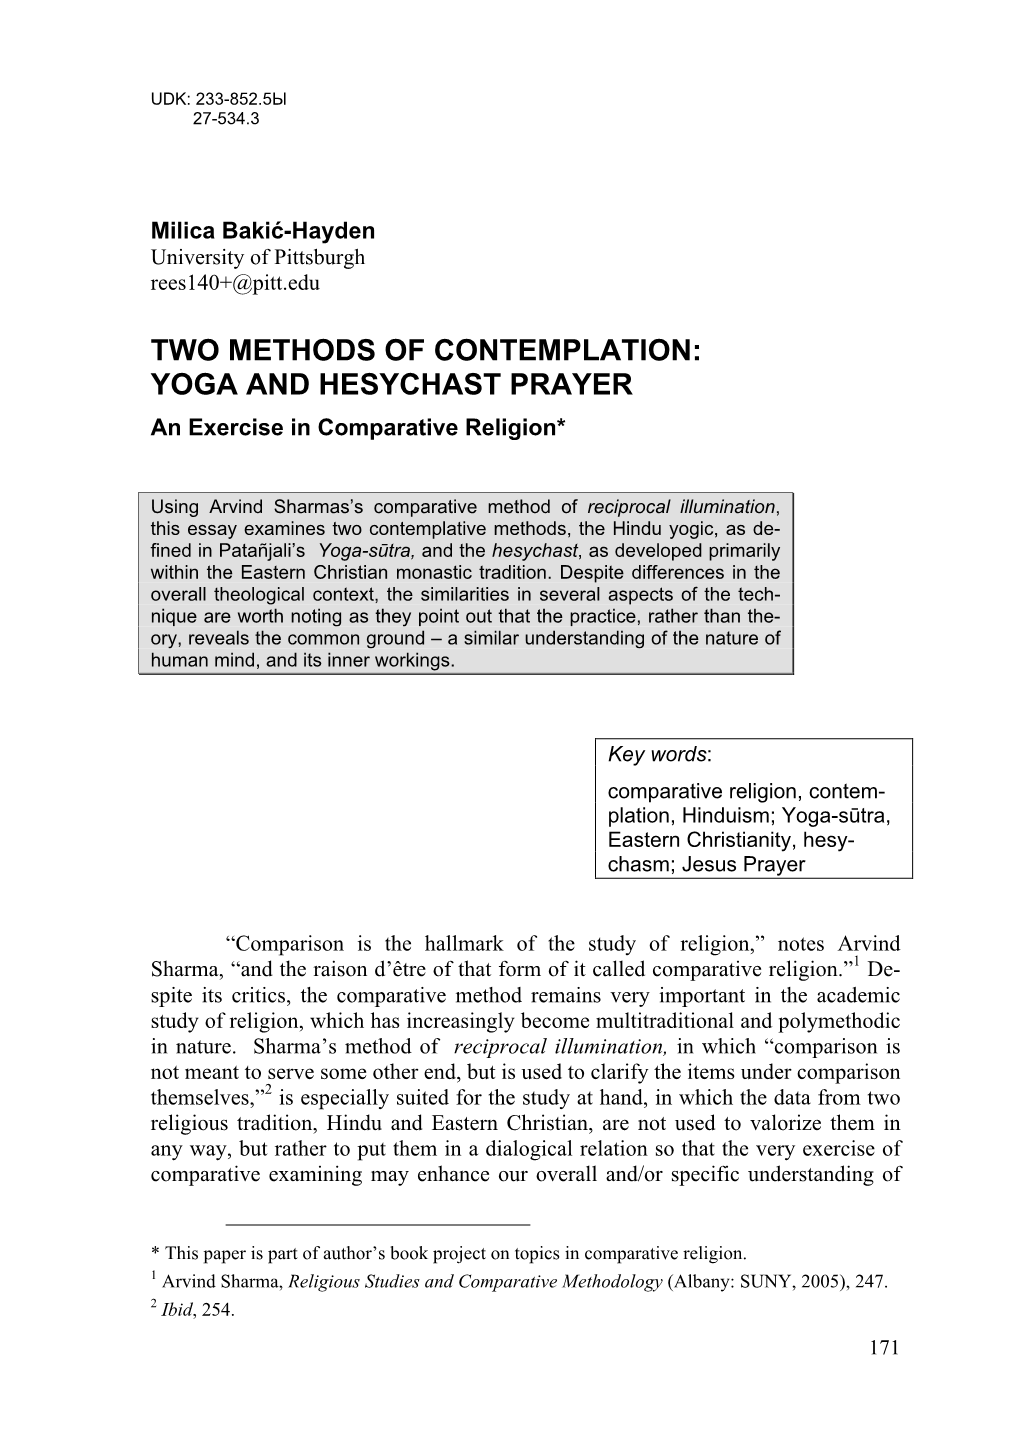 YOGA and HESYCHAST PRAYER an Exercise in Comparative Religion*